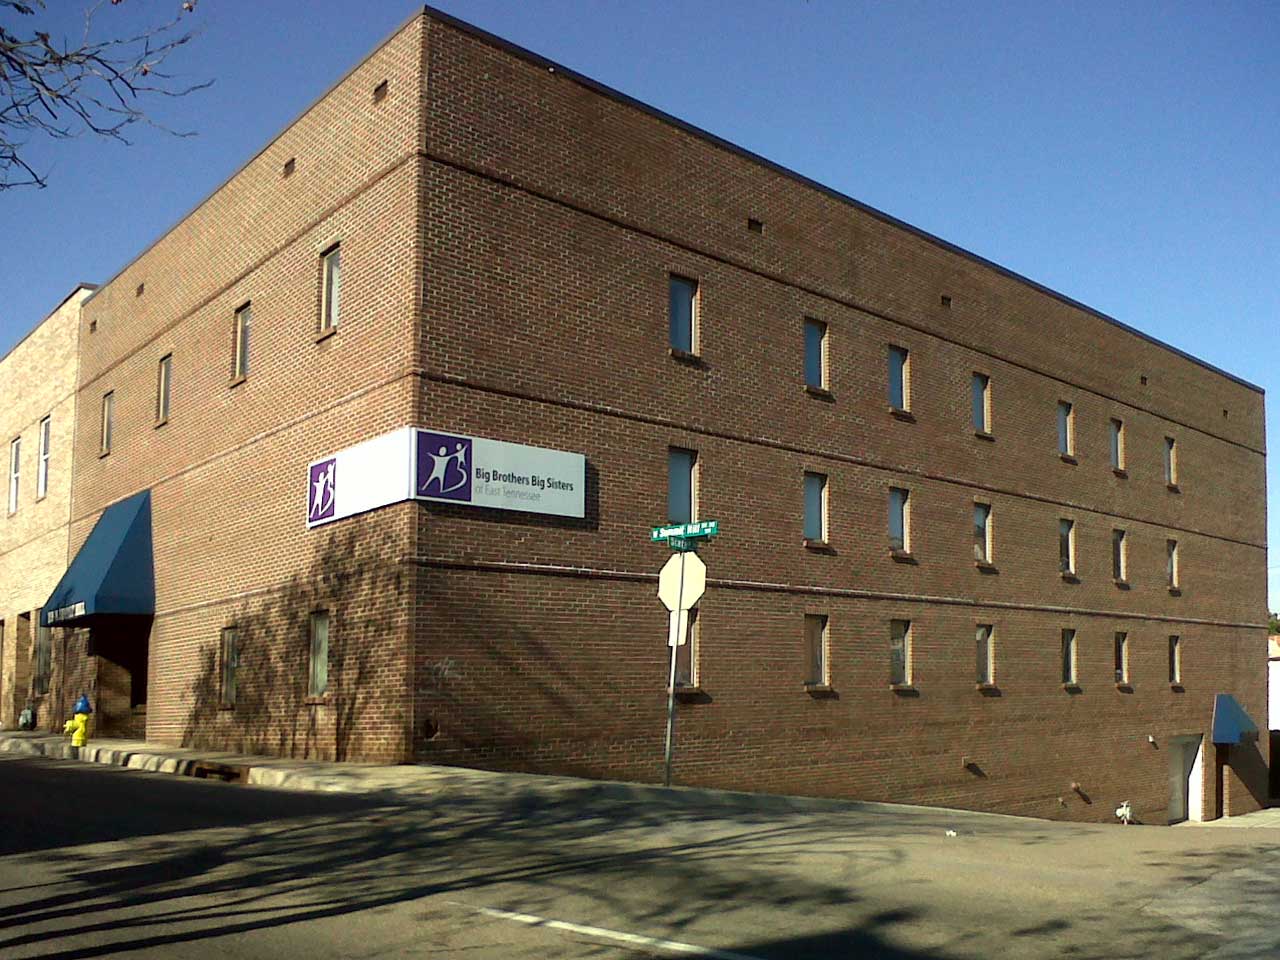 Location of Tennessee office within multi-story brick building.